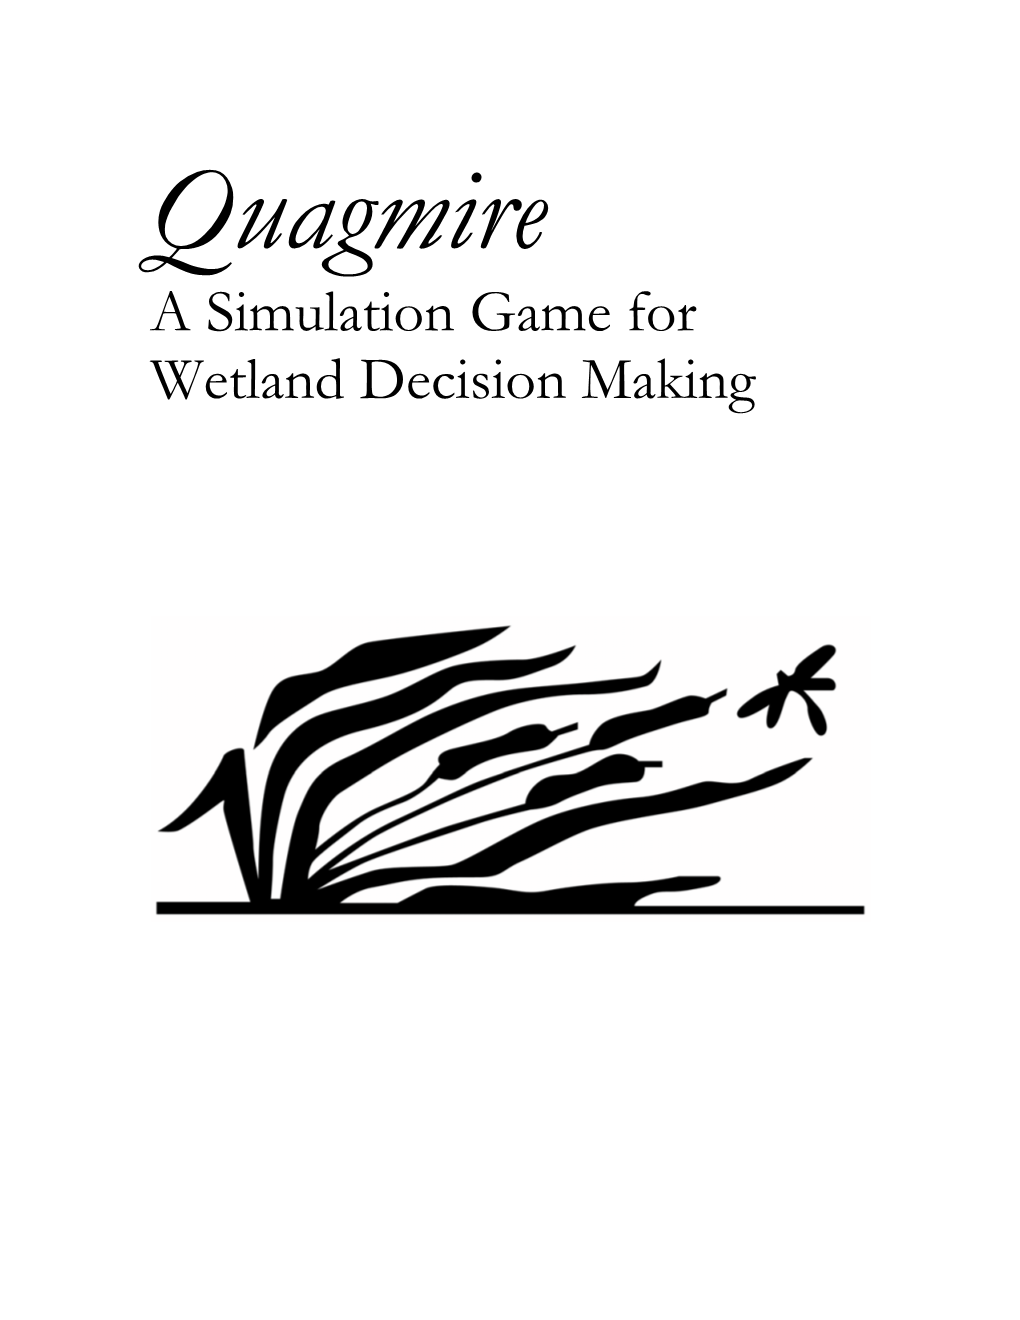 A Simulation Game for Wetland Decision Making